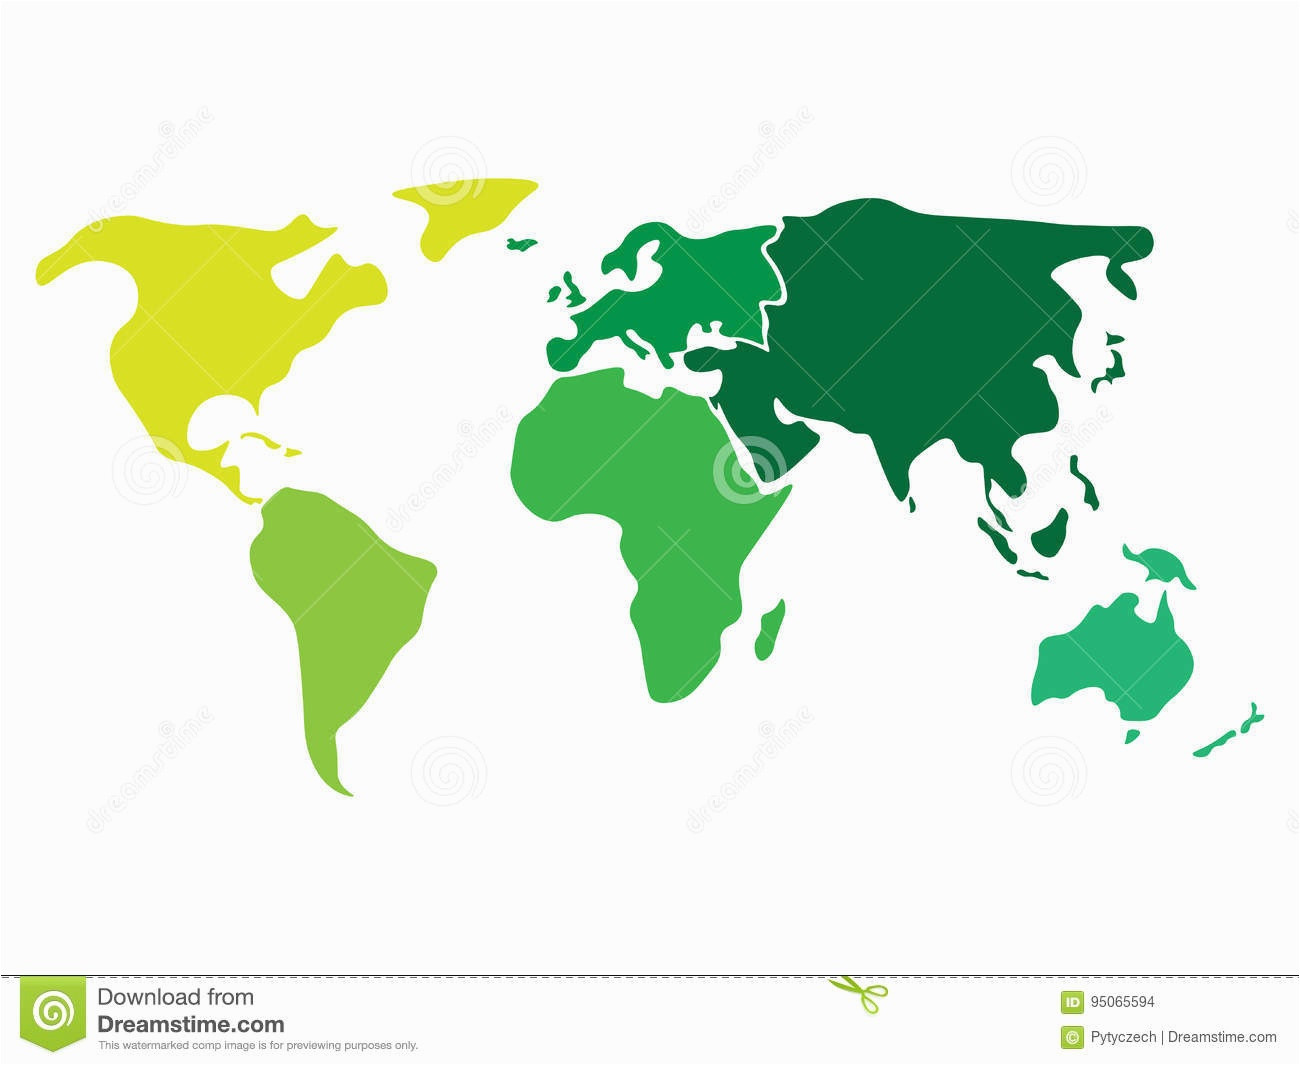 Printable Map Of 7 Continents And 5 Oceans Elegant Multicolored World Map Divided To Six Continents In Different Colors